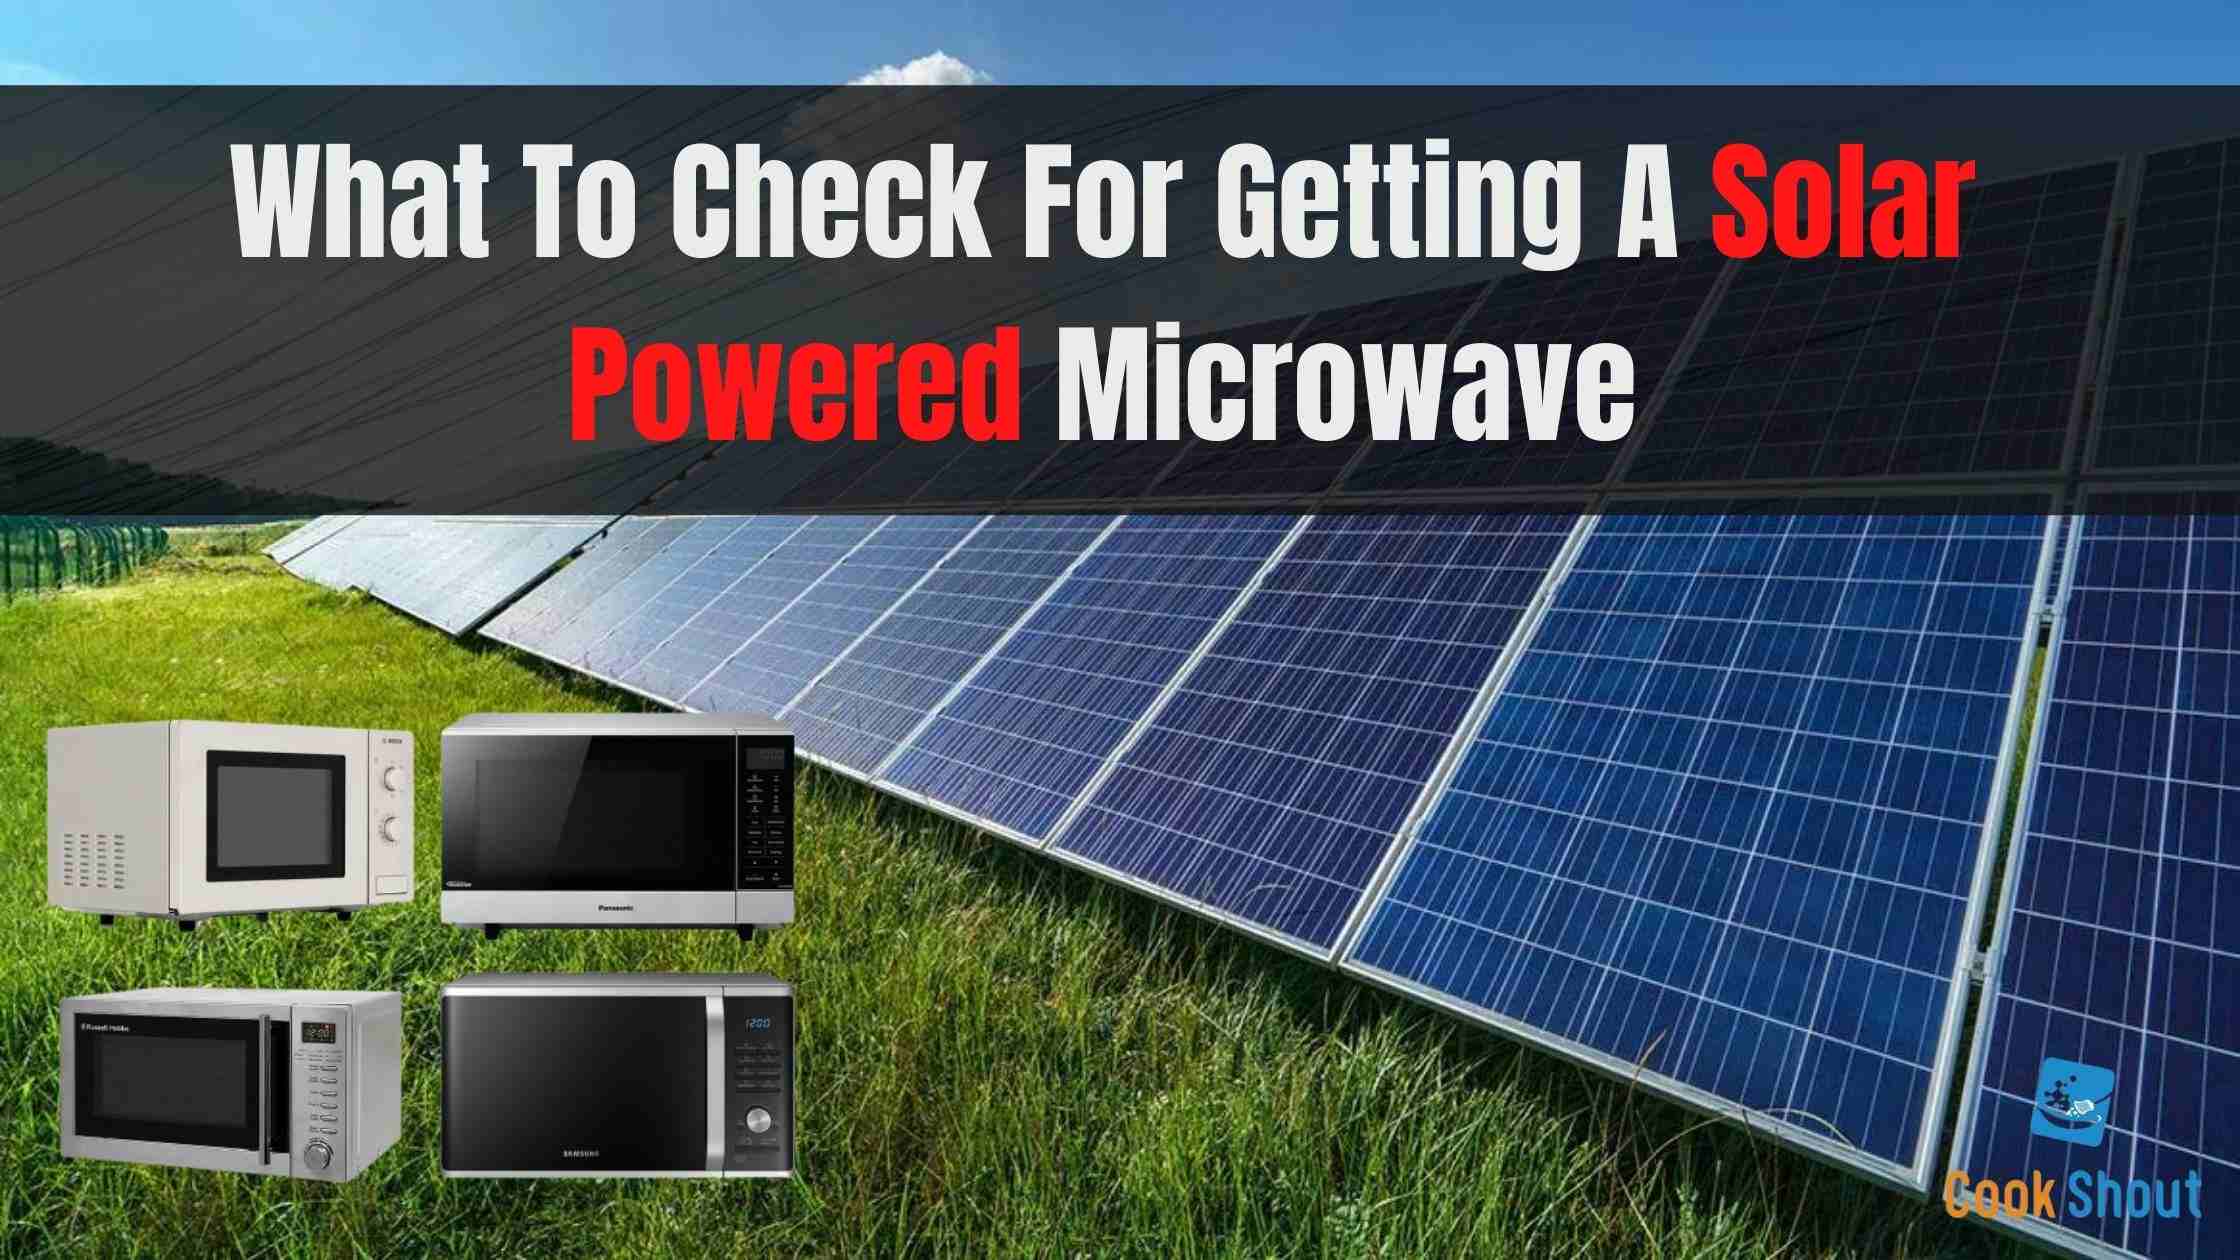 What To Check For Getting A Solar Powered Microwave